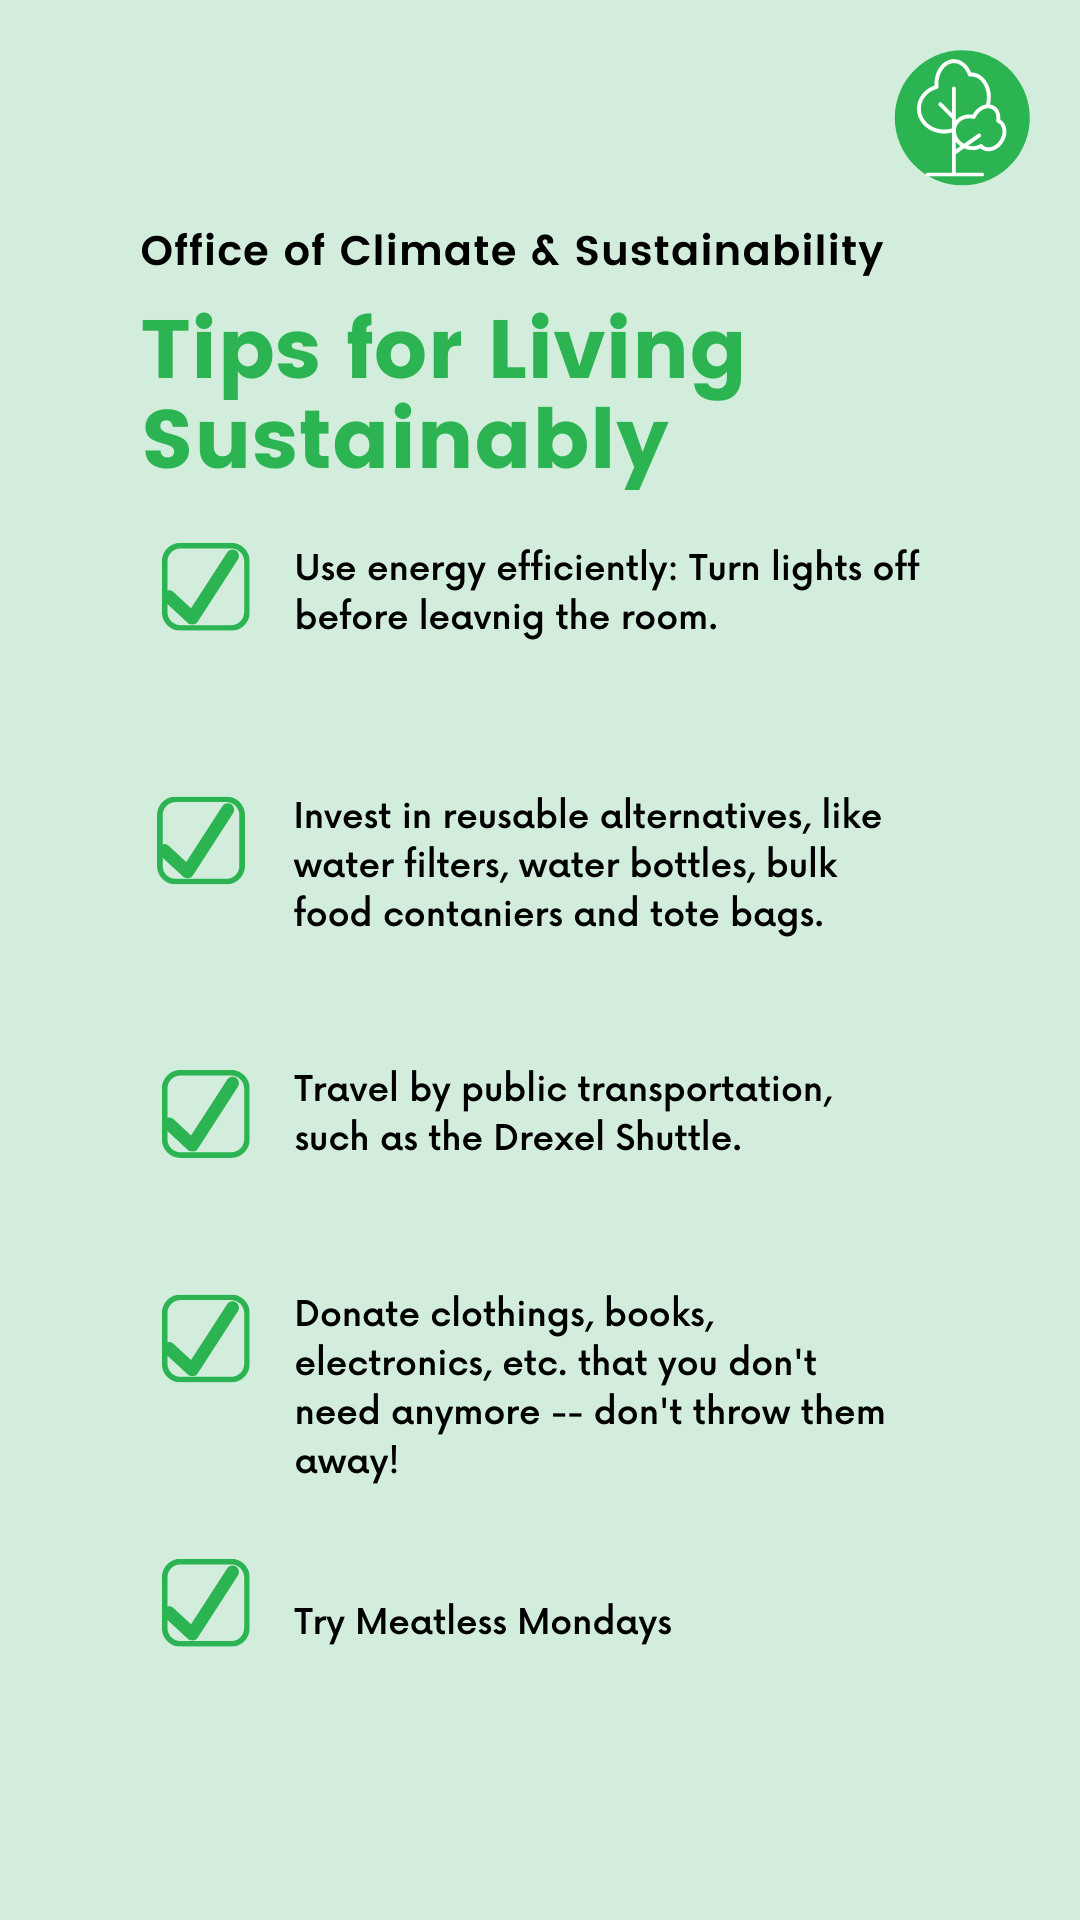 Tips for Living Sustainably